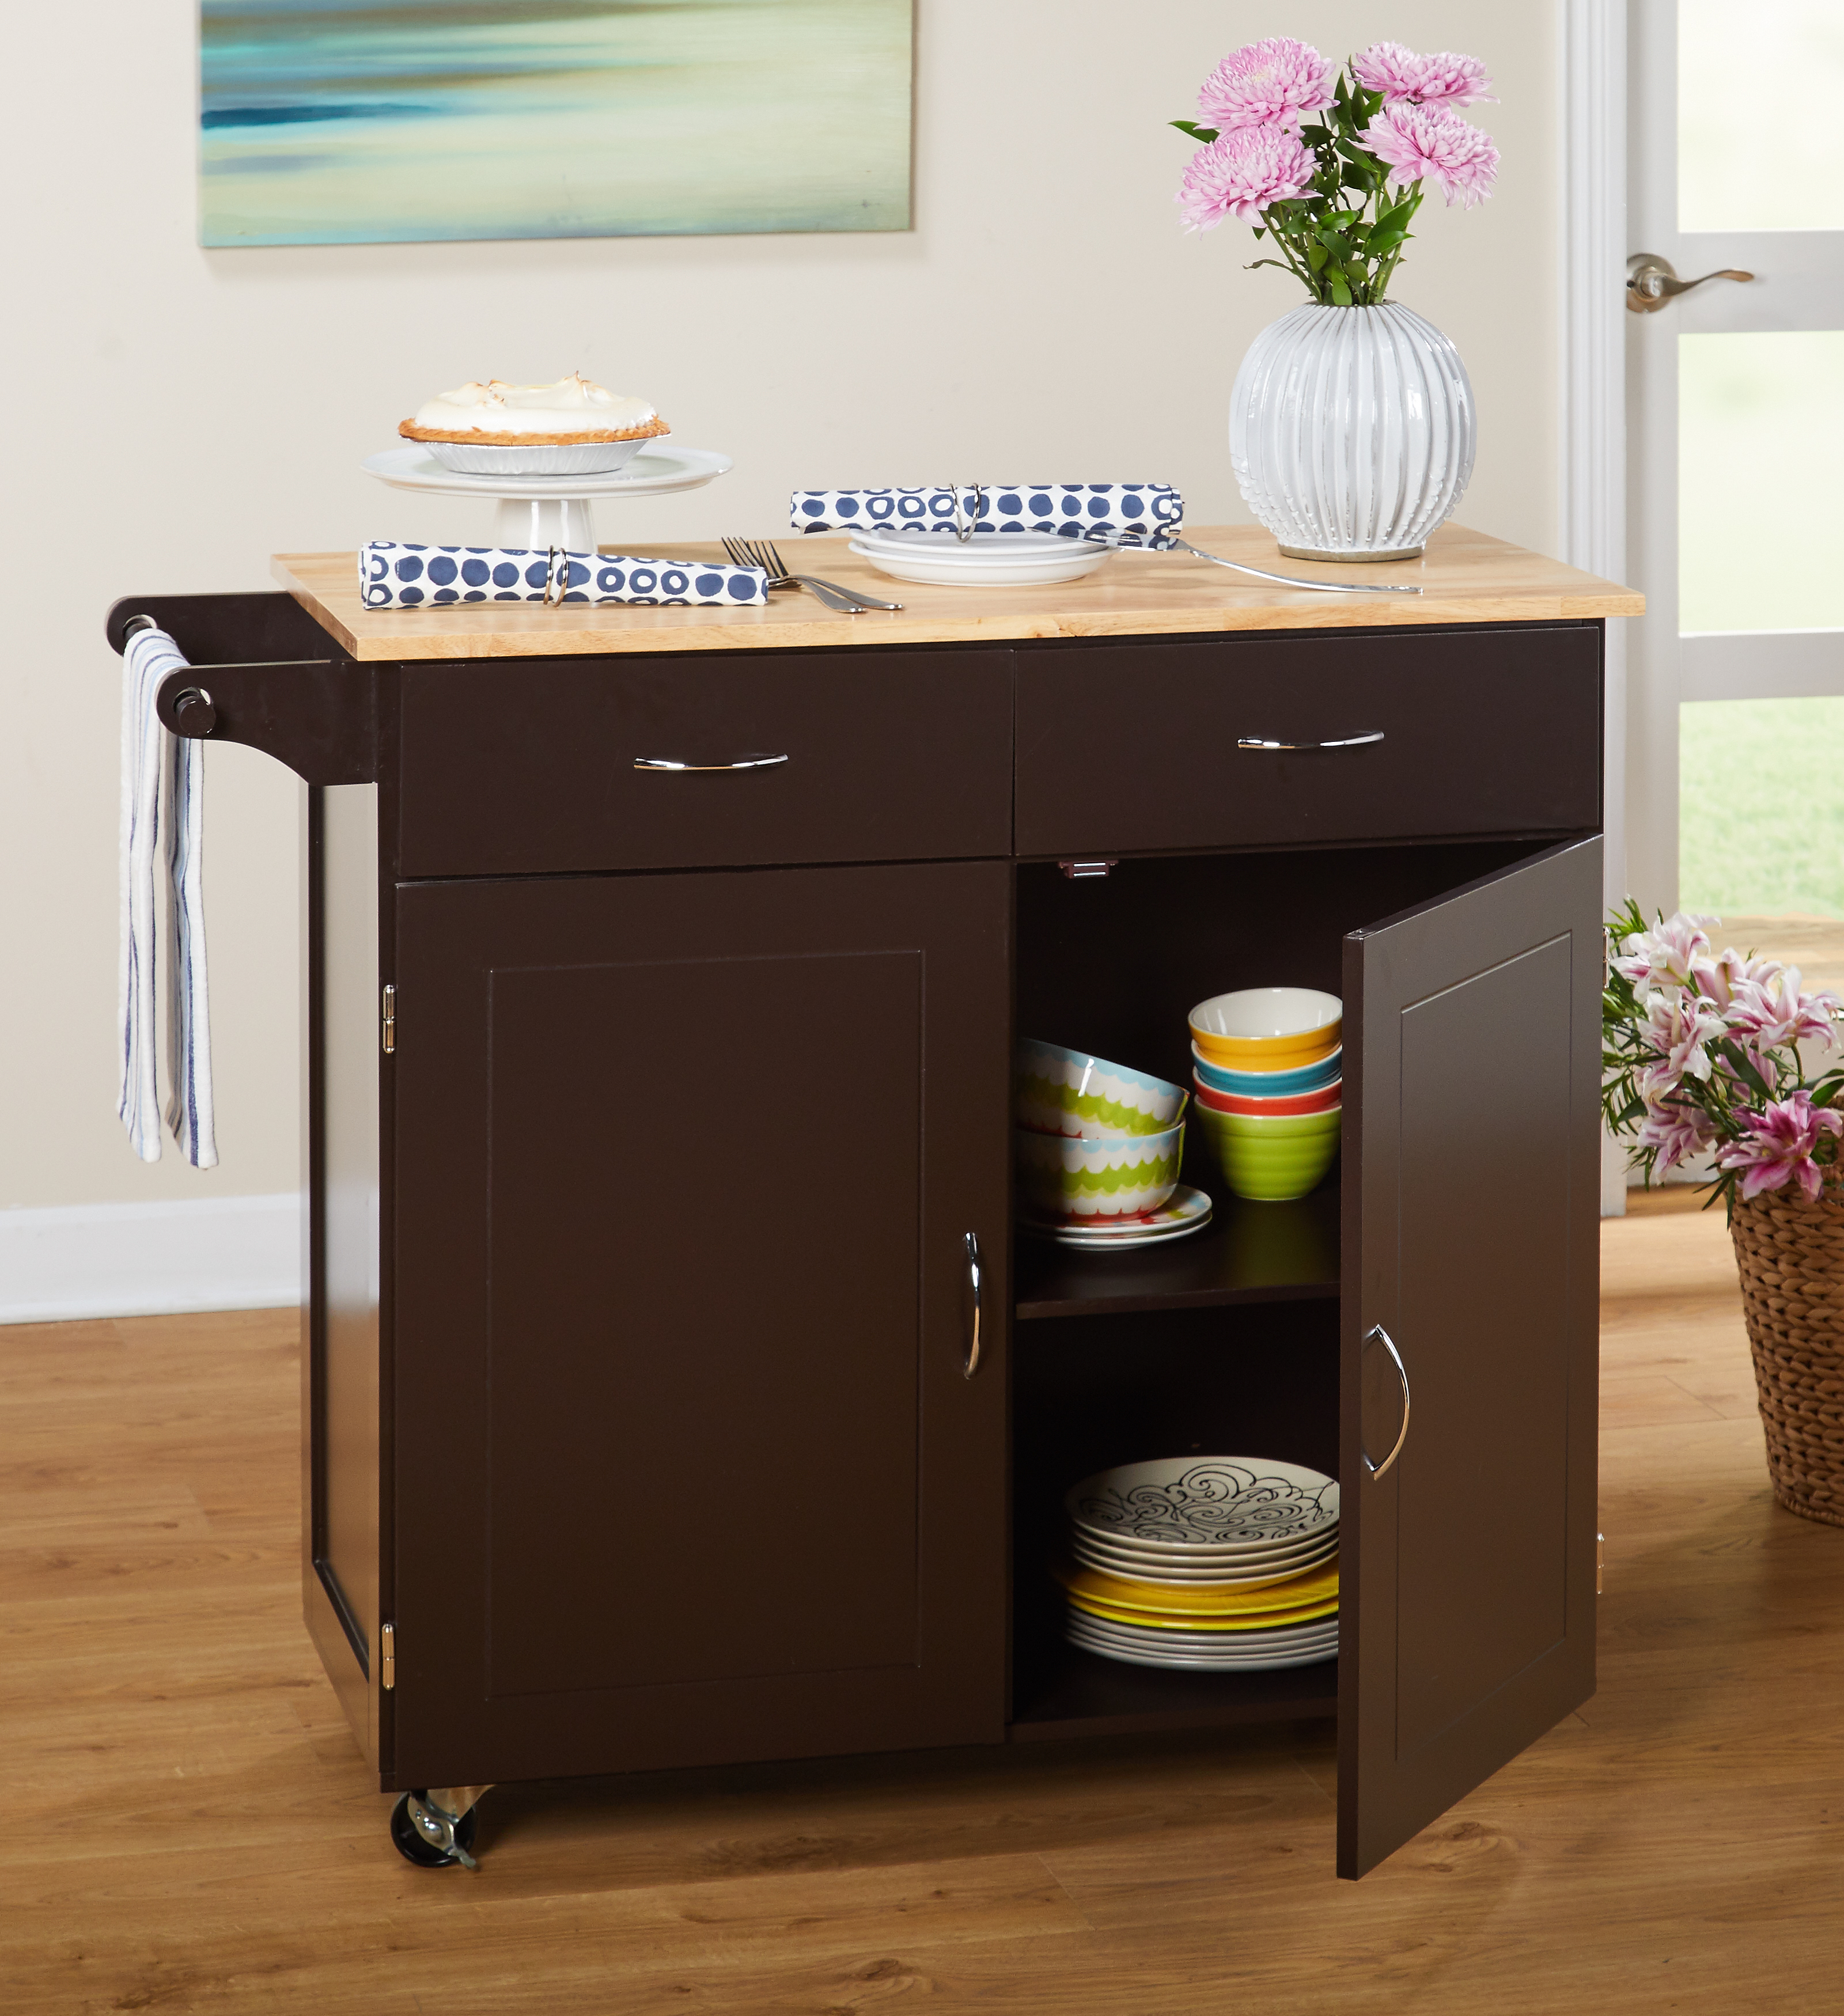 TMS Large Kitchen Cart with Rubber wood Top, Espresso - image 2 of 5